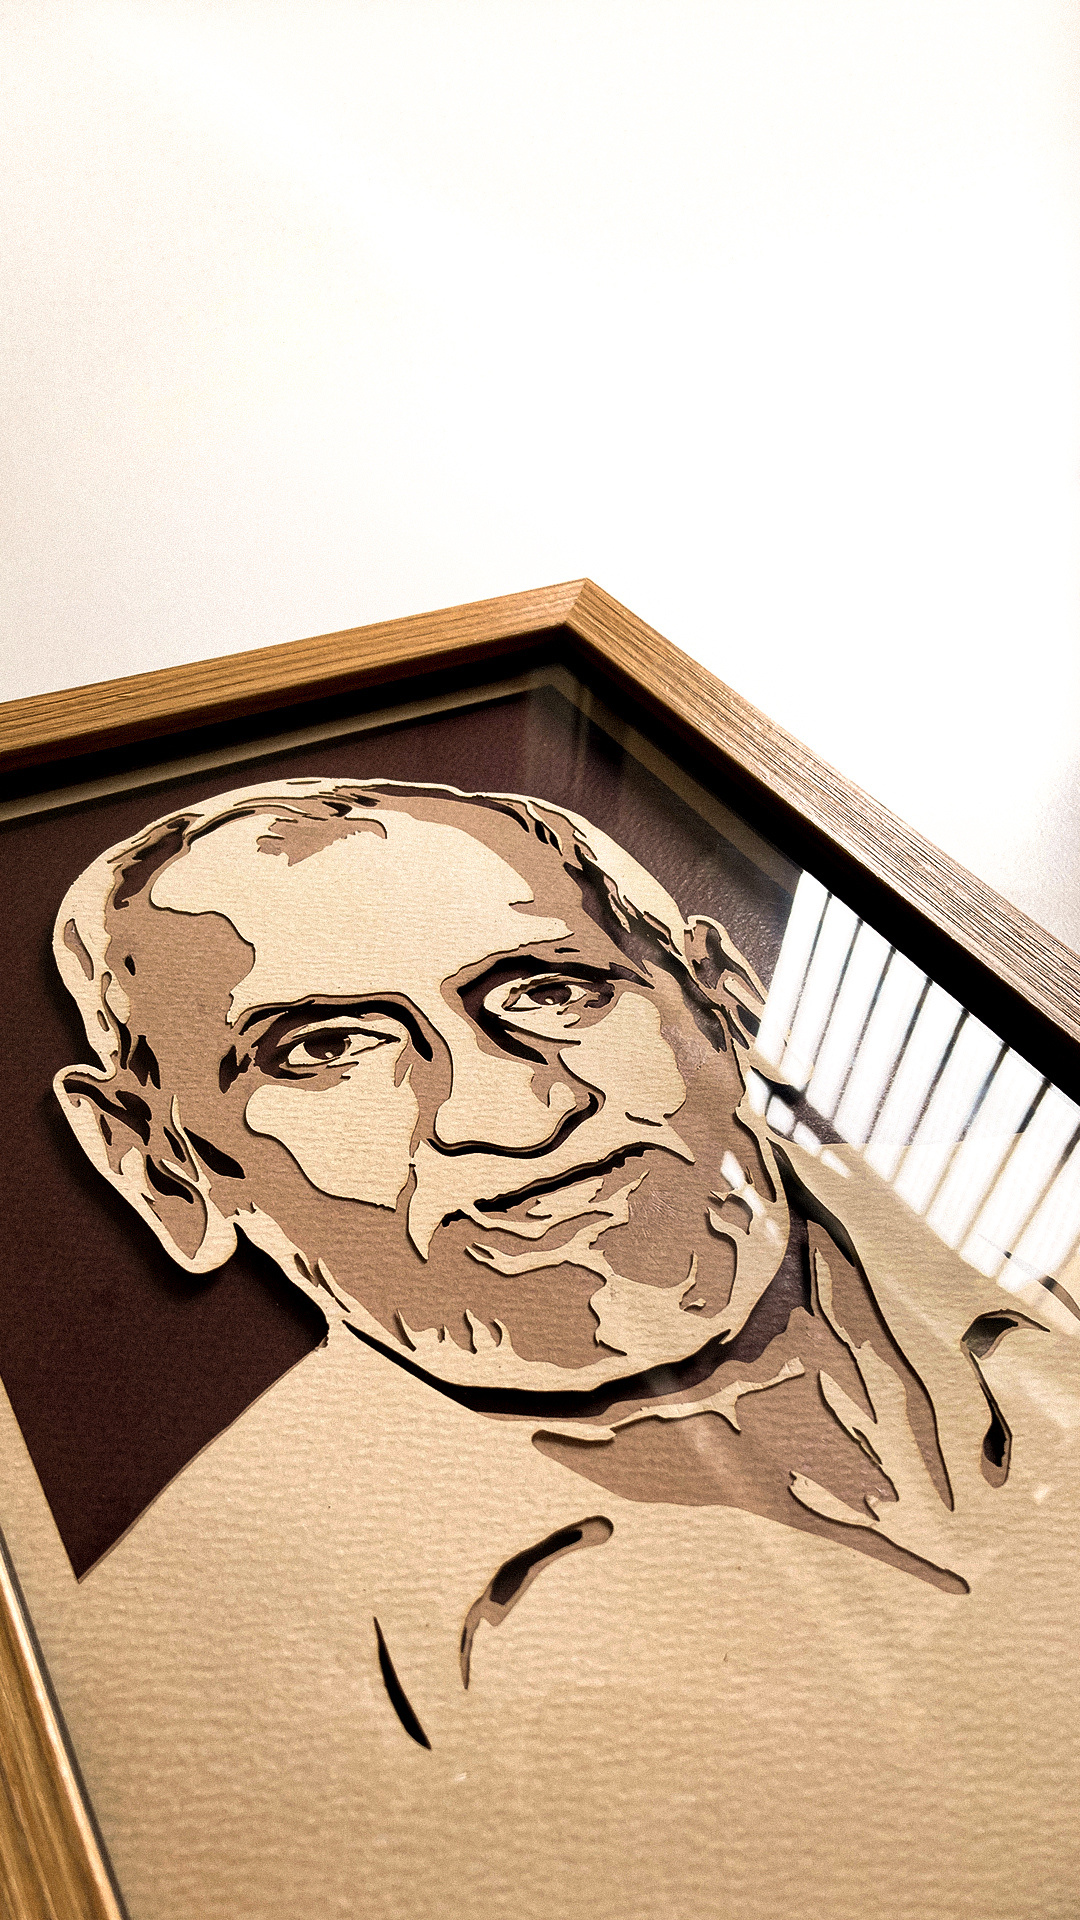 Preserve your most loving memories with Paper portrait